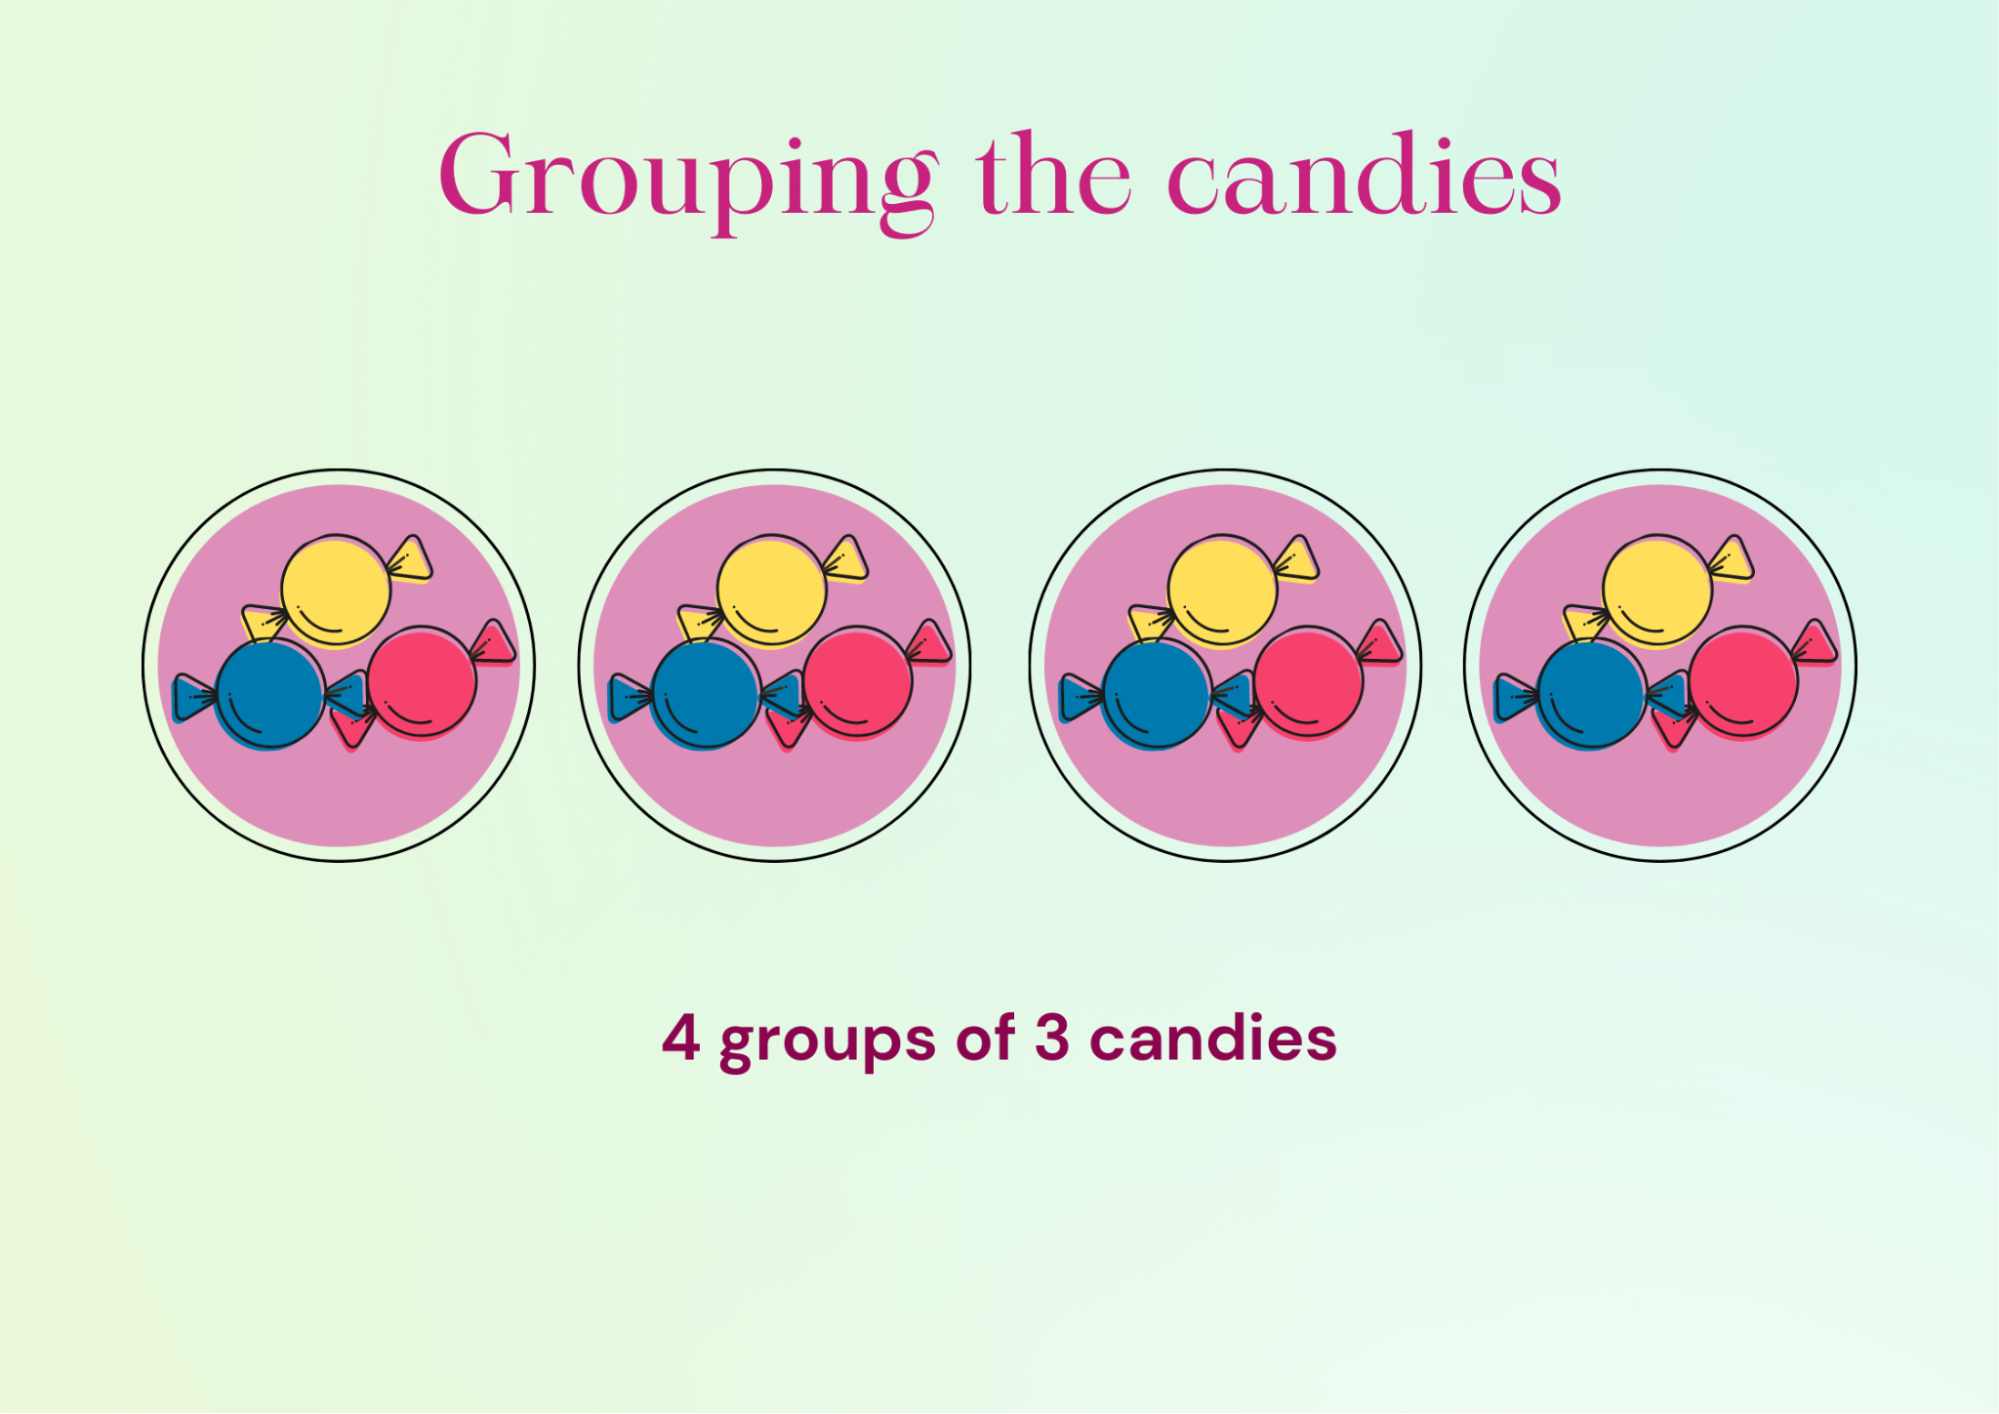 The Image Shows Four Groups Each of Three Candies